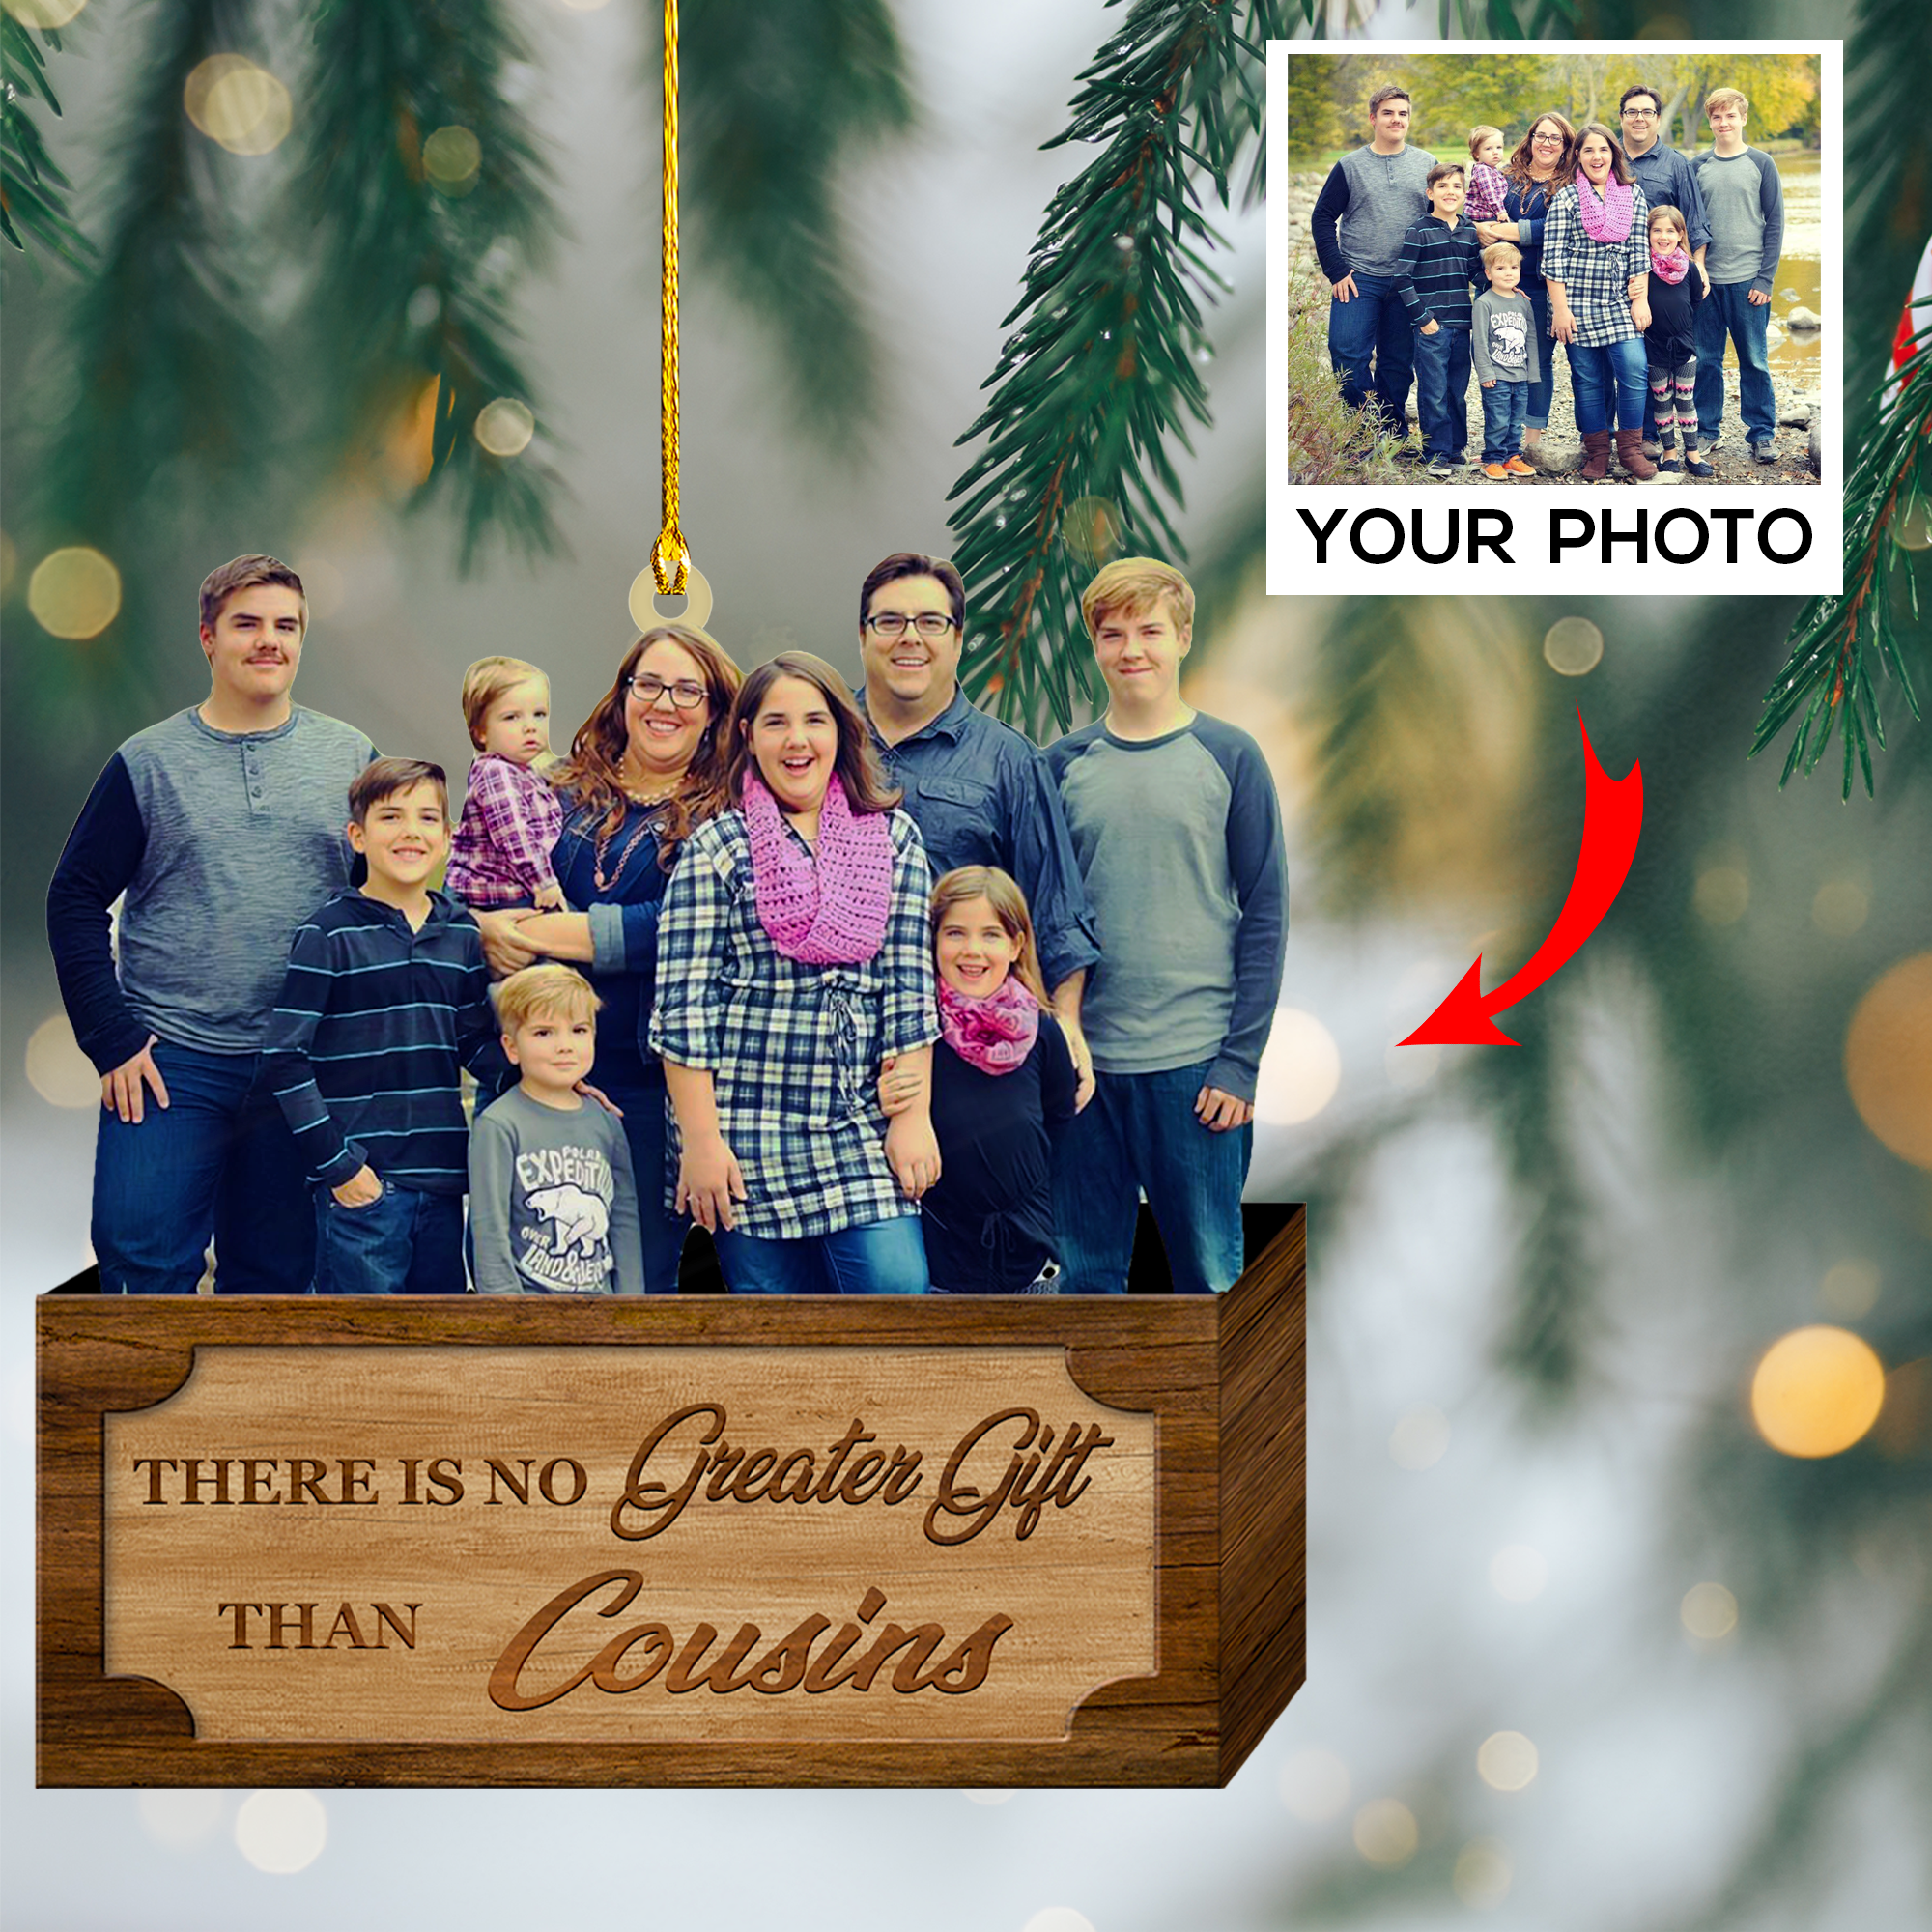 Personalized Photo Ornament - Gift For Family Member - No Greater Gift Than Cousins | Cousin